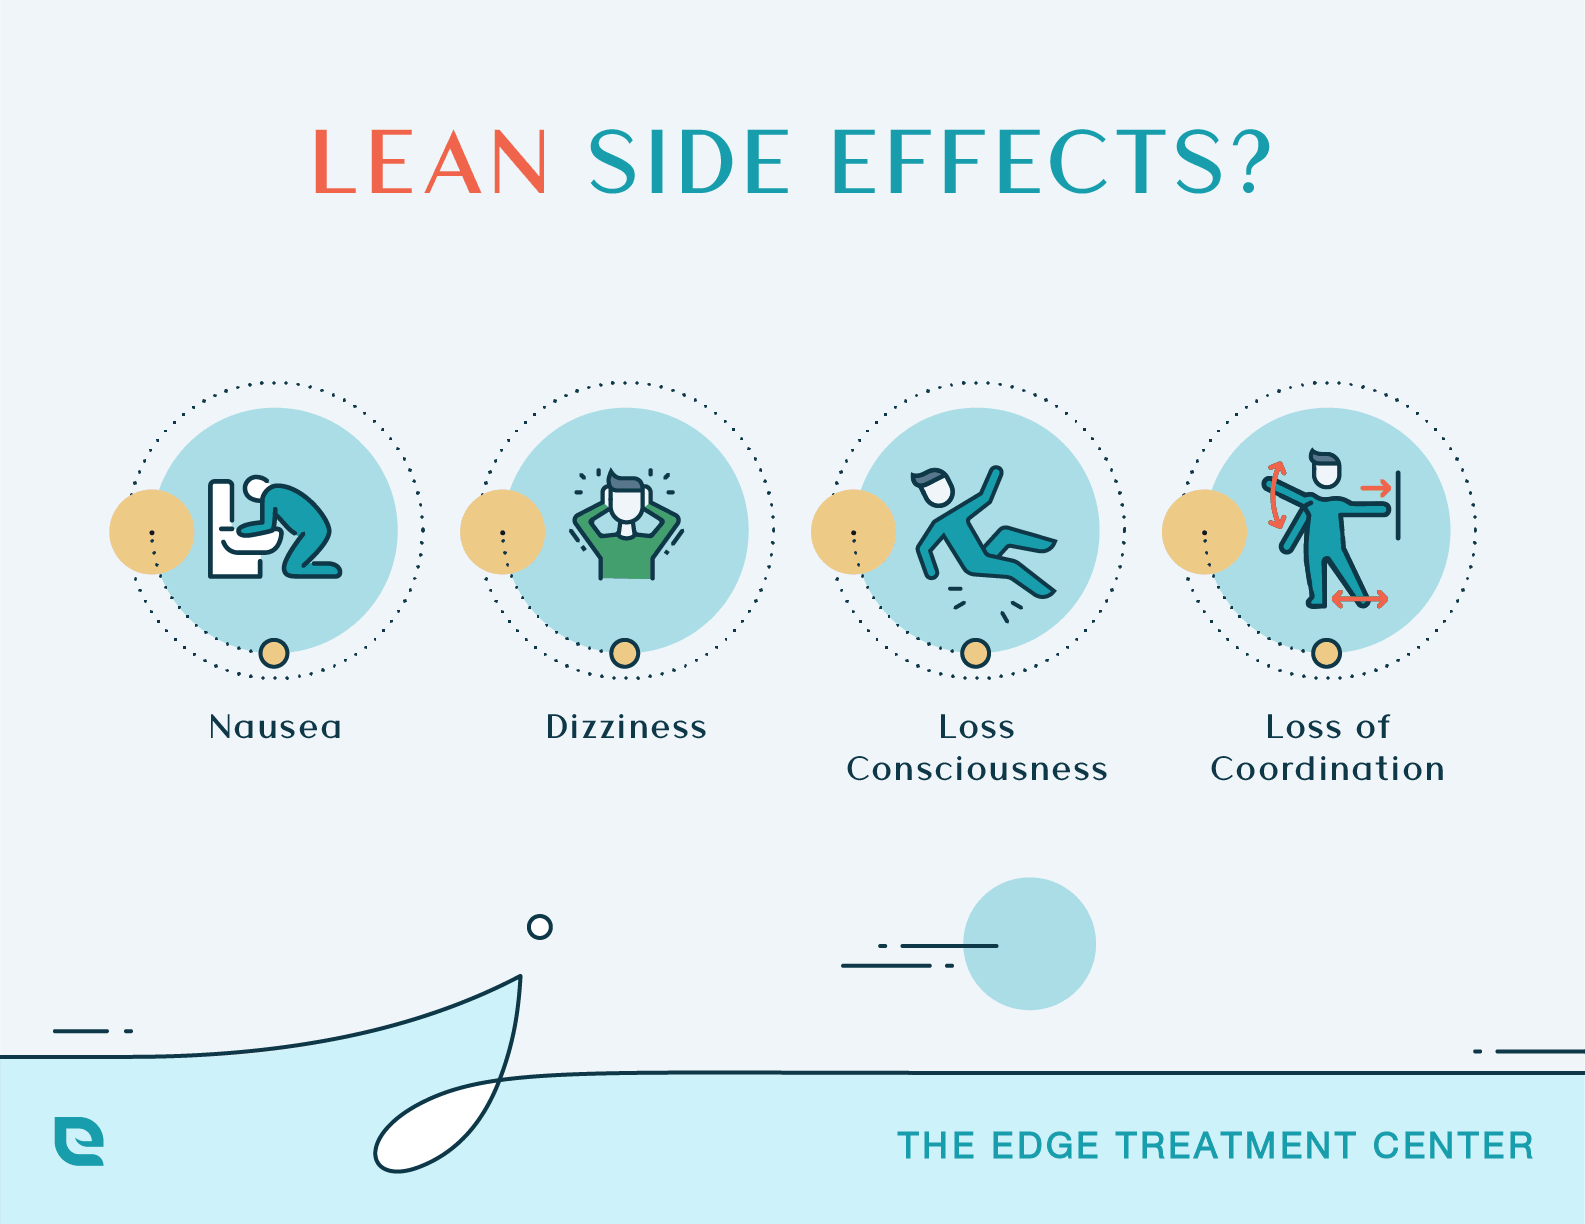 what are the side effects of lean? This images displays 4 side effects of lean (purple drank)